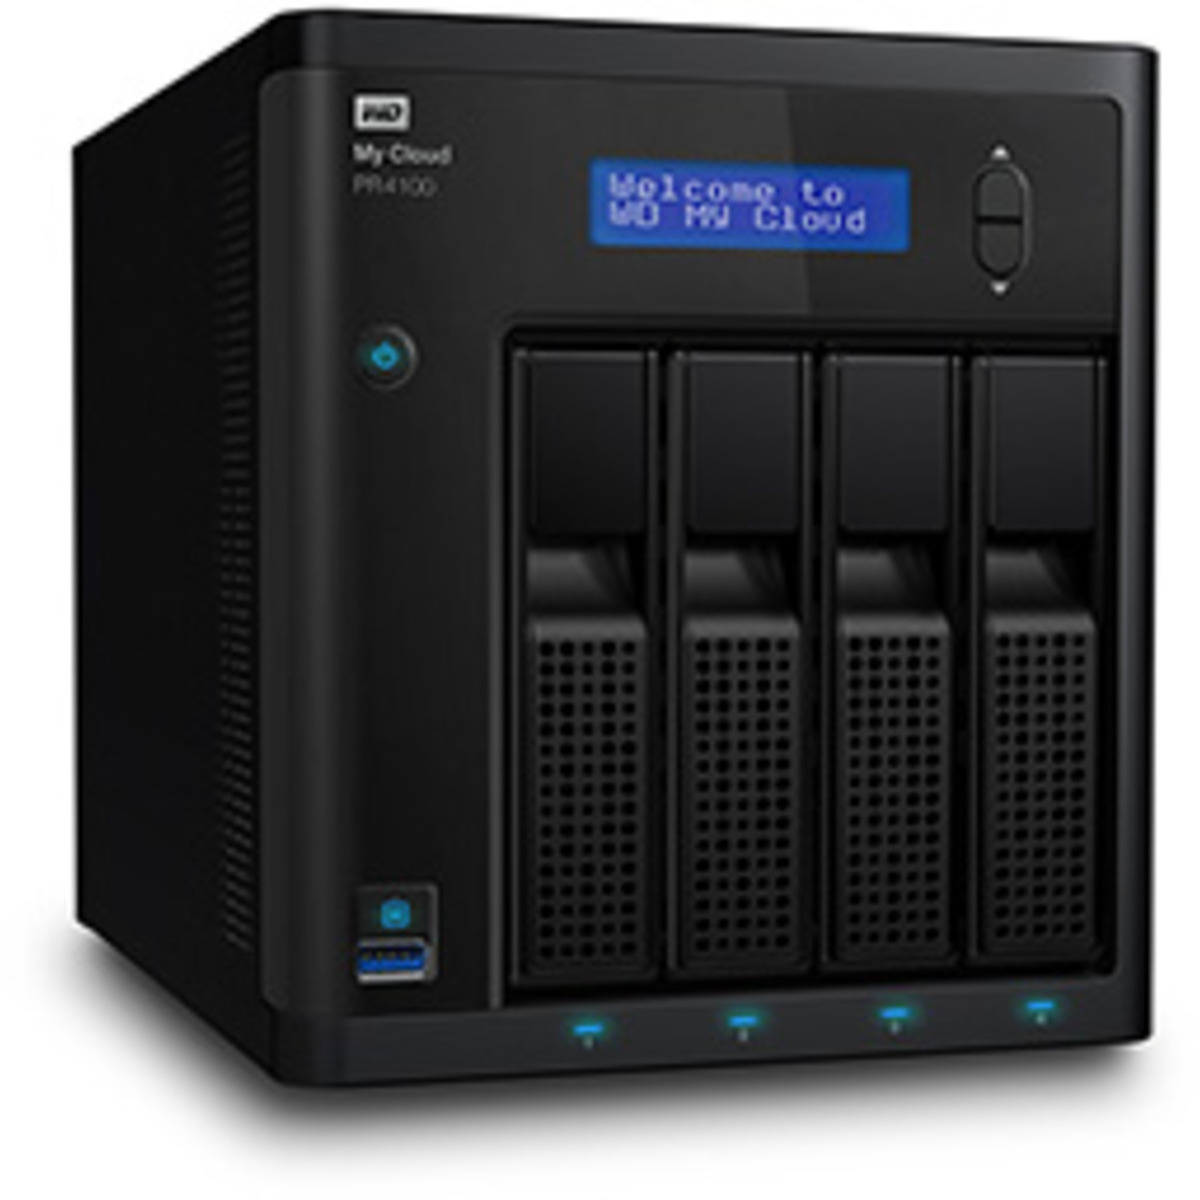 Western Digital My Cloud Pro PR4100 24tb 4-Bay Desktop Multimedia / Power User / Business NAS - Network Attached Storage Device 4x6tb Western Digital Red WD60EFAX 3.5 5400rpm SATA 6Gb/s HDD NAS Class Drives Installed - Burn-In Tested My Cloud Pro PR4100